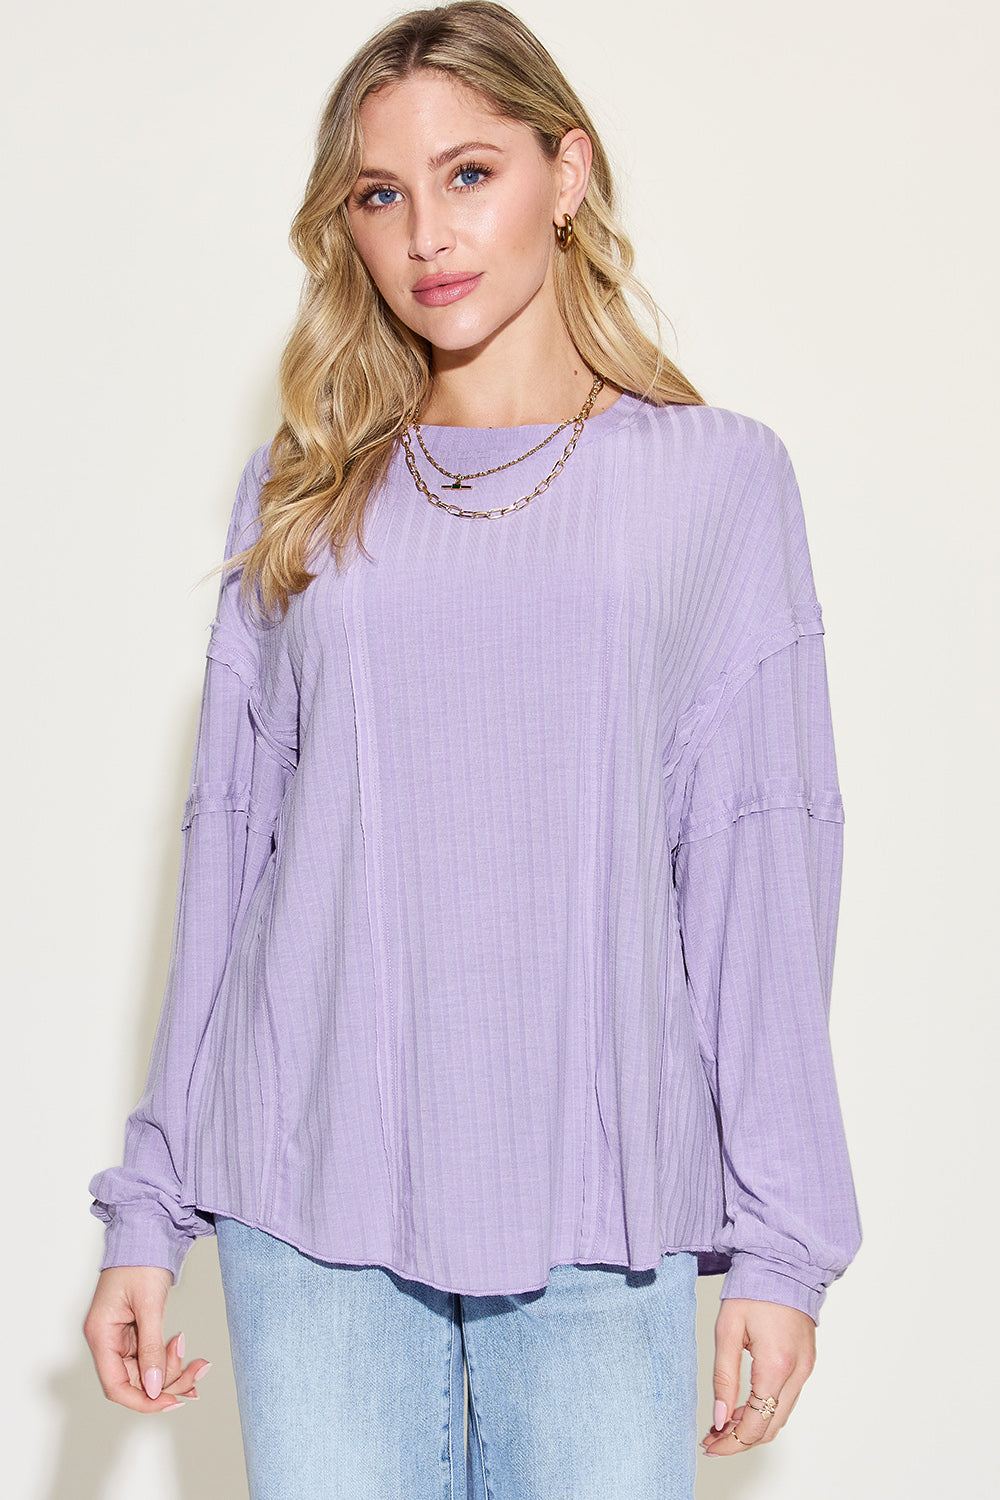 Oversized Long Sleeve Top - Ribbed Fabric - Exposed Seam Detail - Inspired Eye Boutique